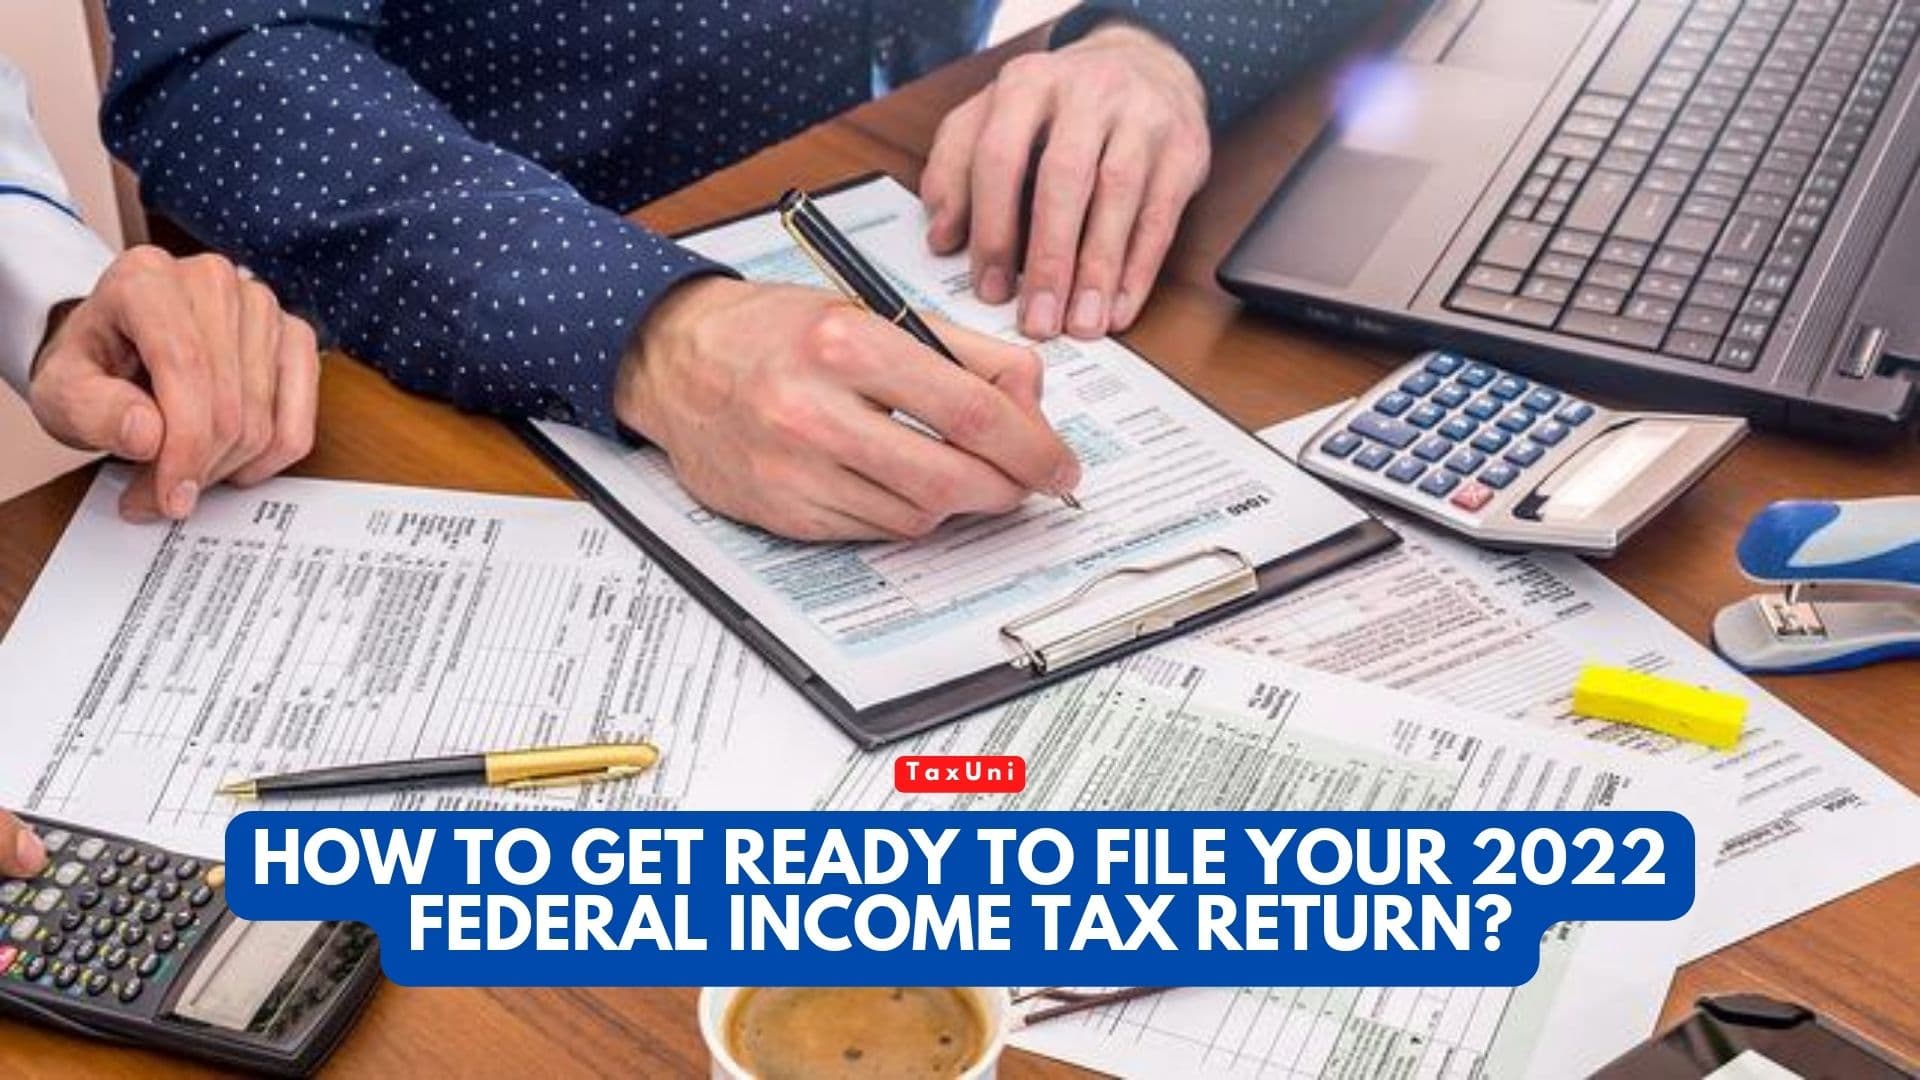 How To Get Ready To File Your 2022 Federal Income Tax Return 